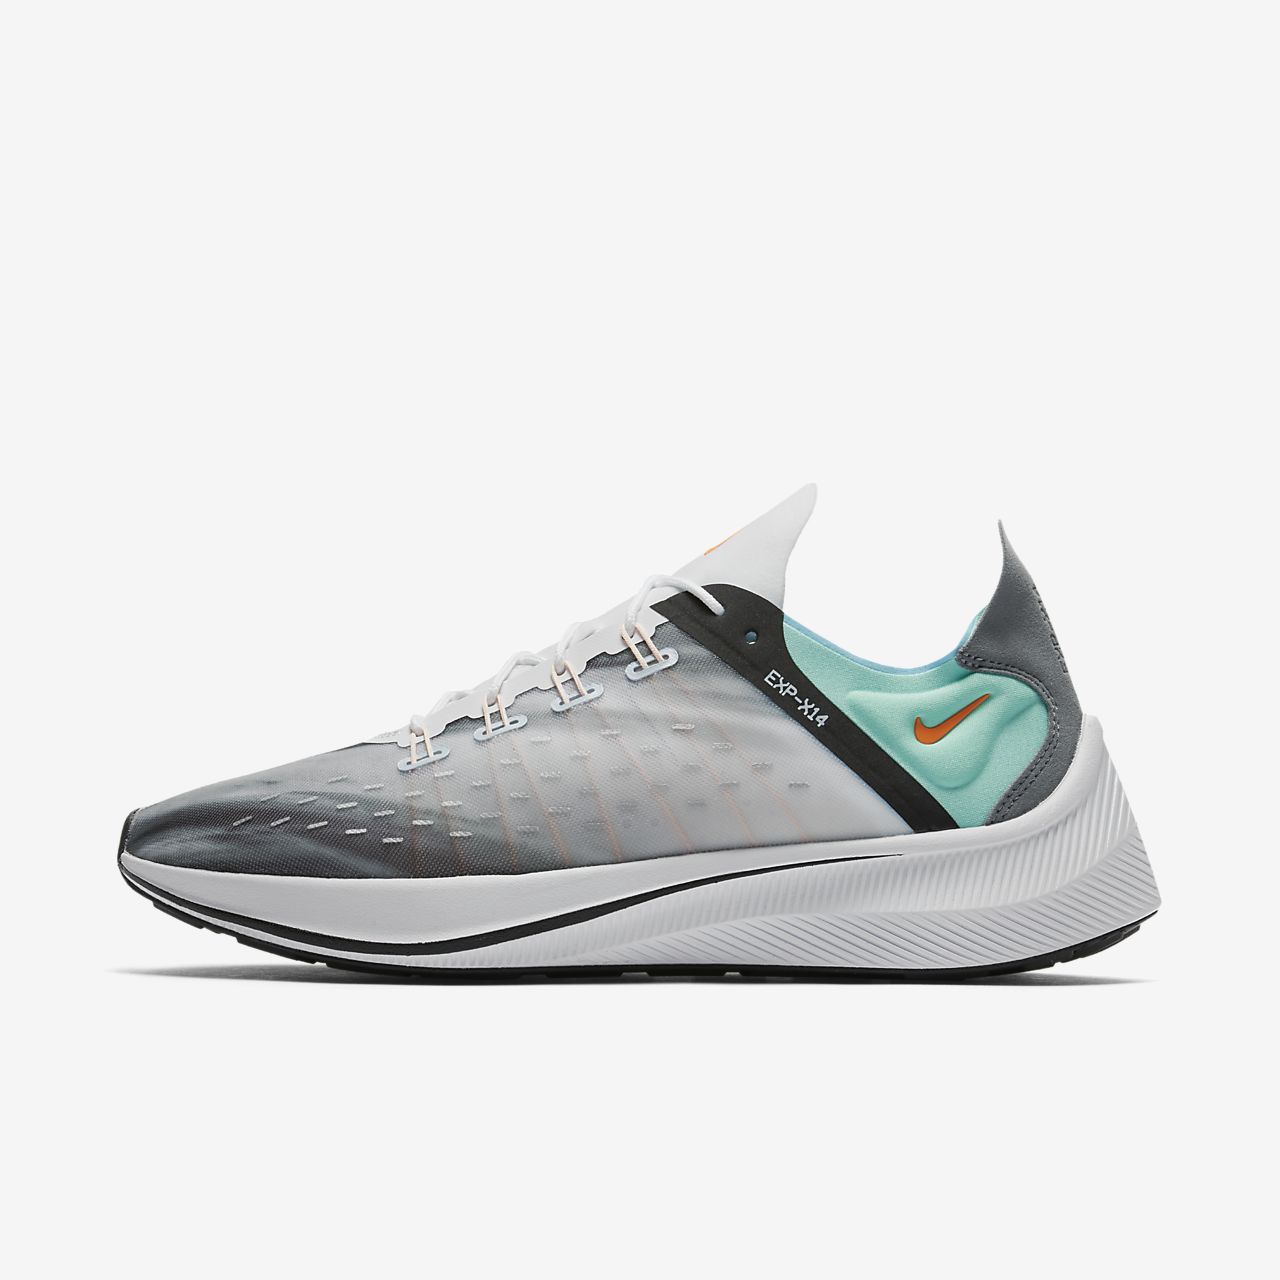 nike exp x14 running shoes